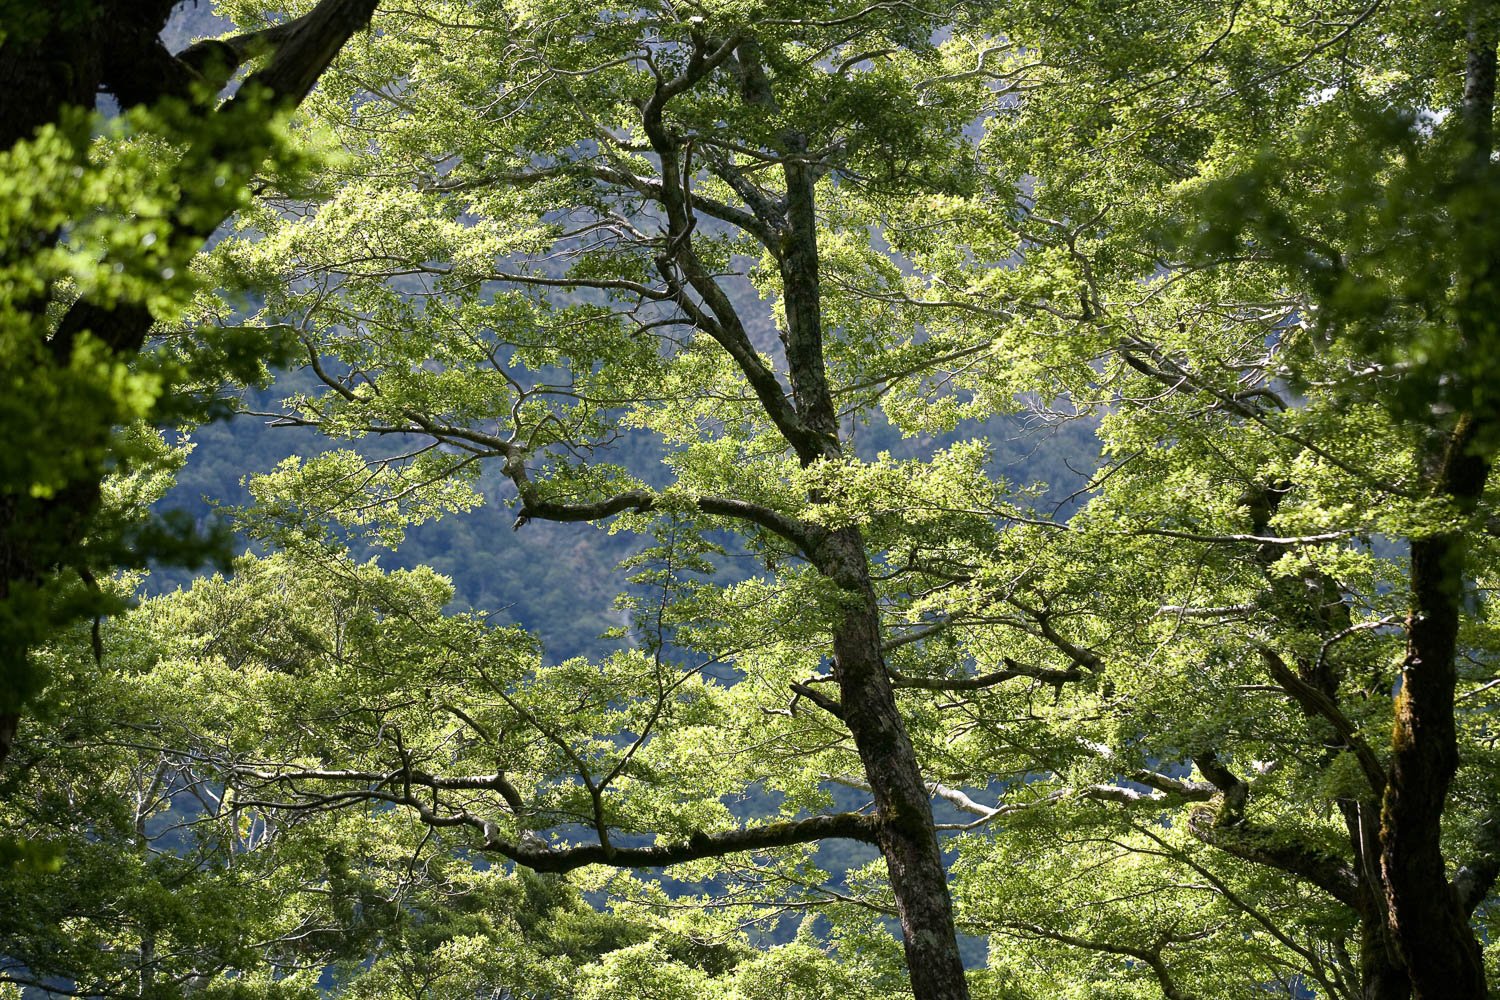 Trees with many branches full of leaves, Tree Canopy, Routeburn Track - New Zealand